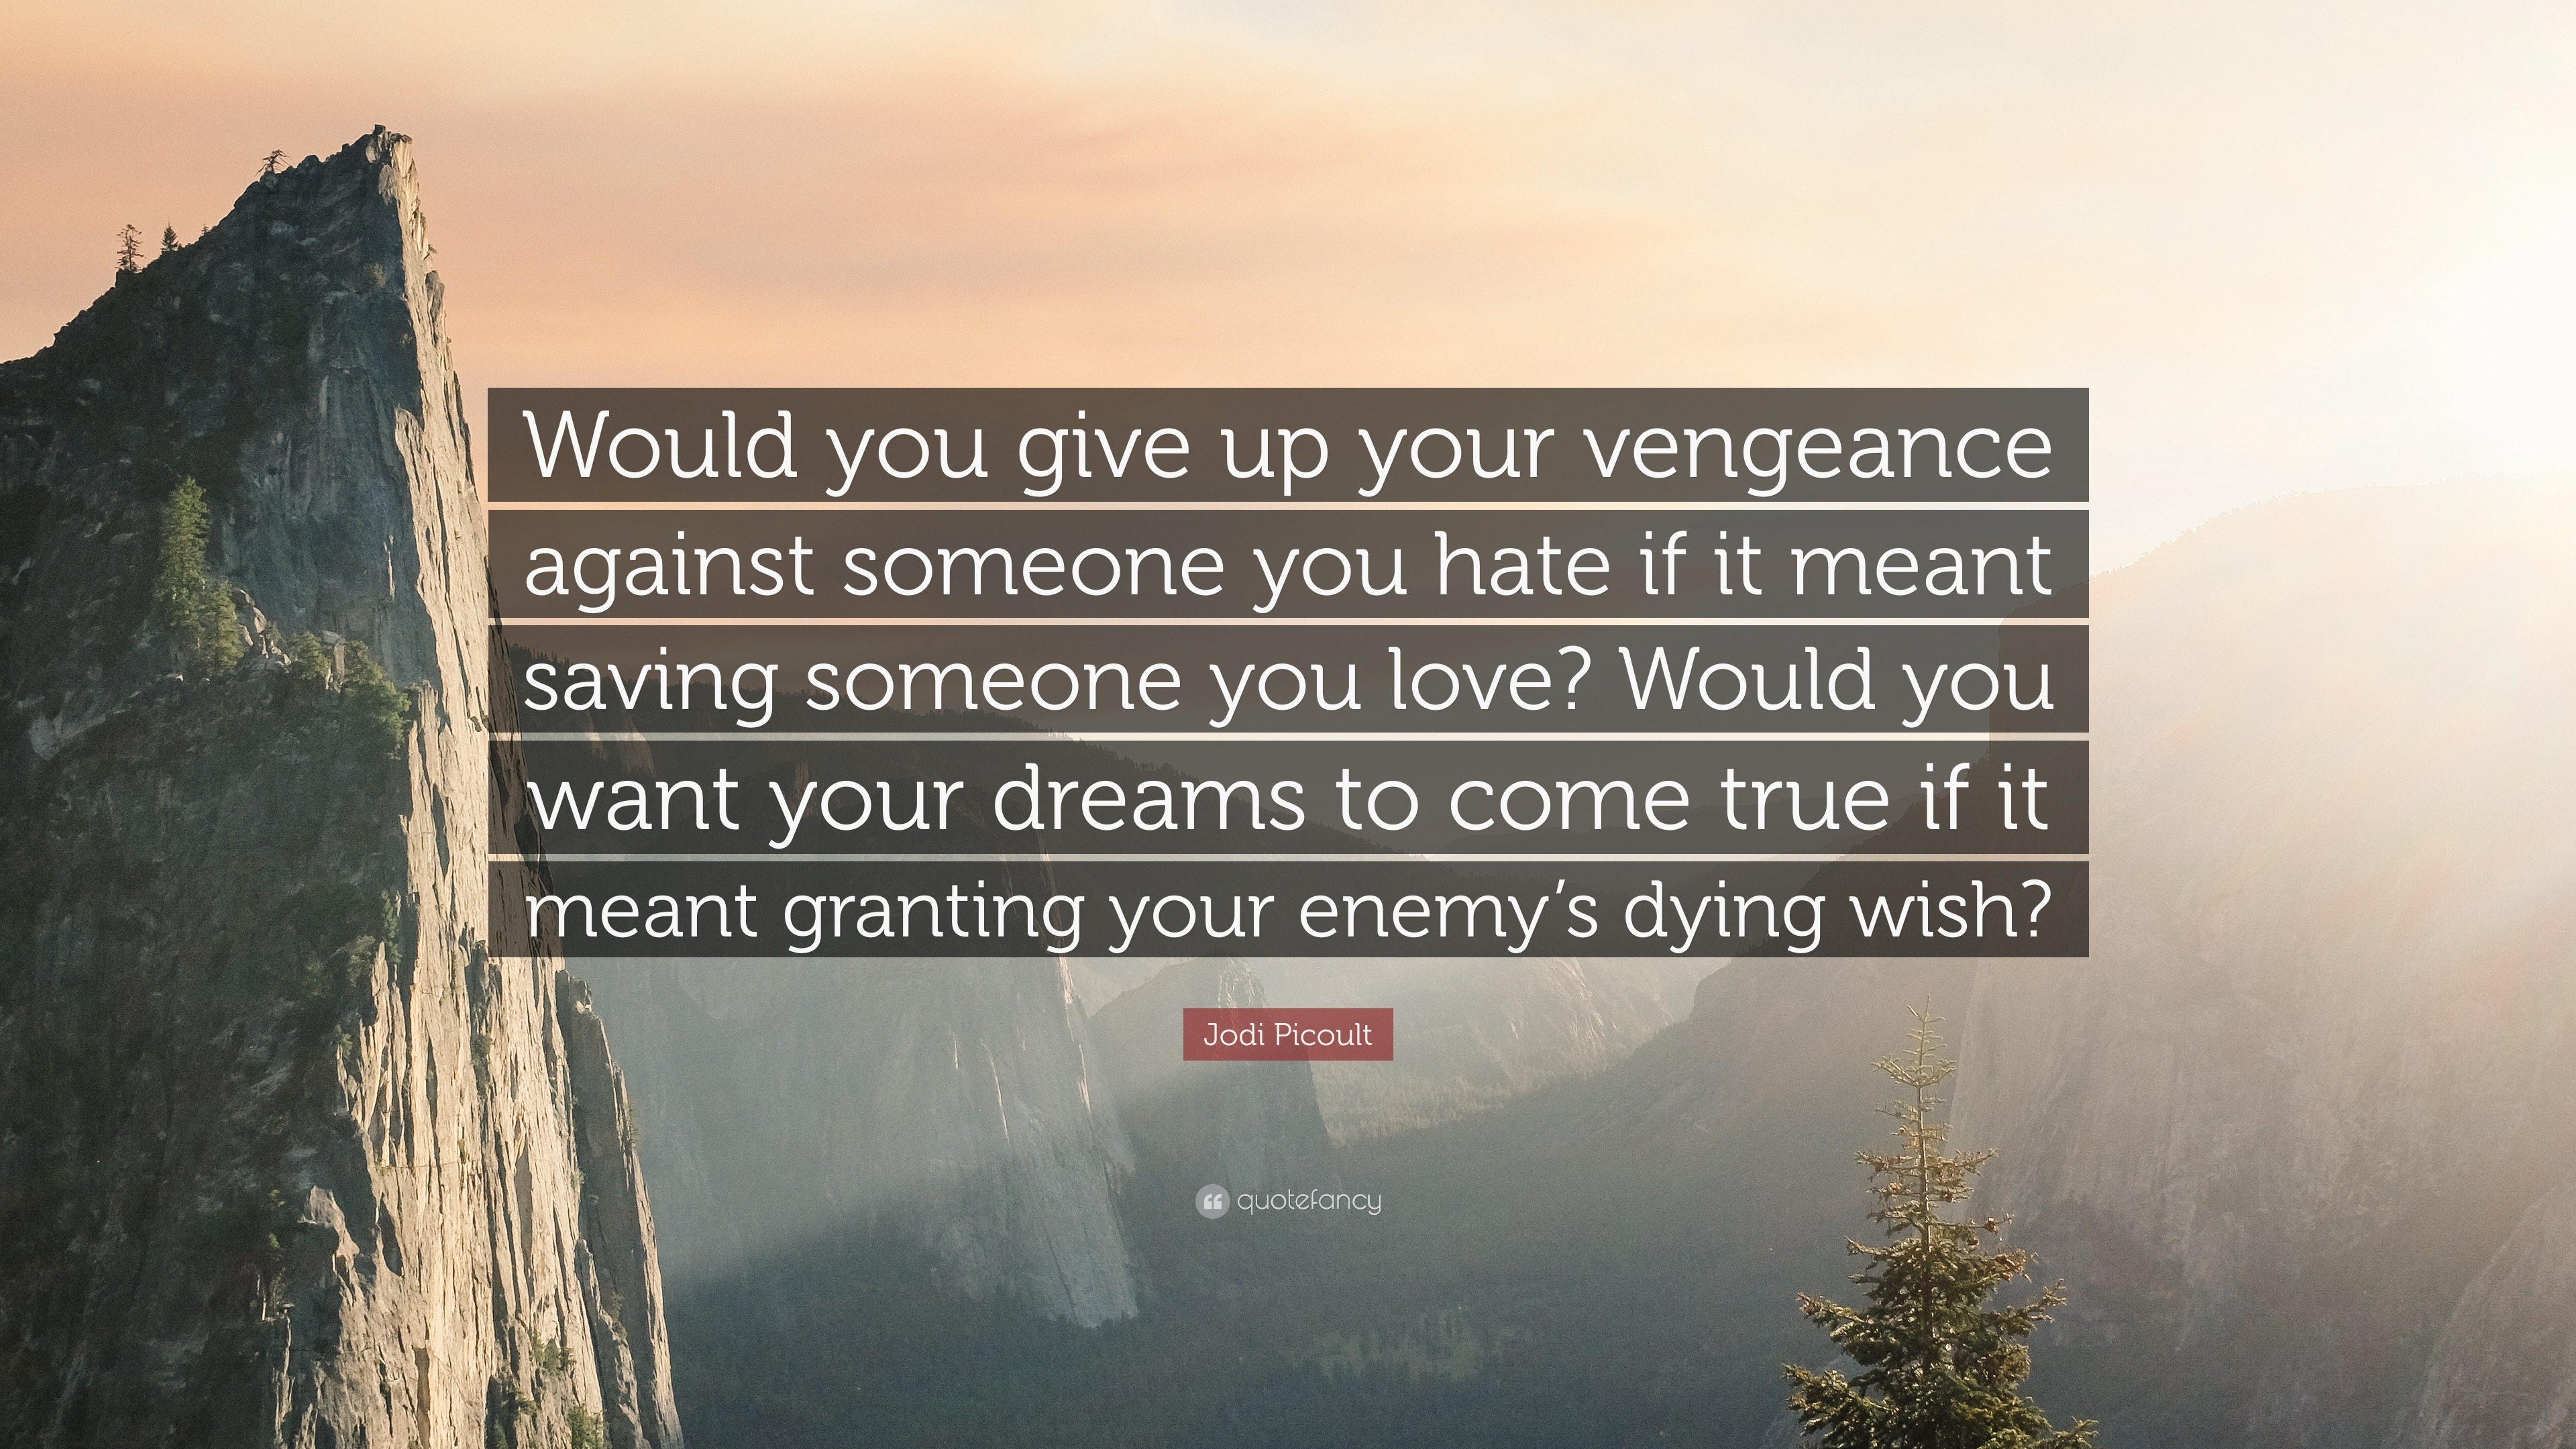 Jodi Picoult Quote “Would you give up your vengeance against someone you hate if